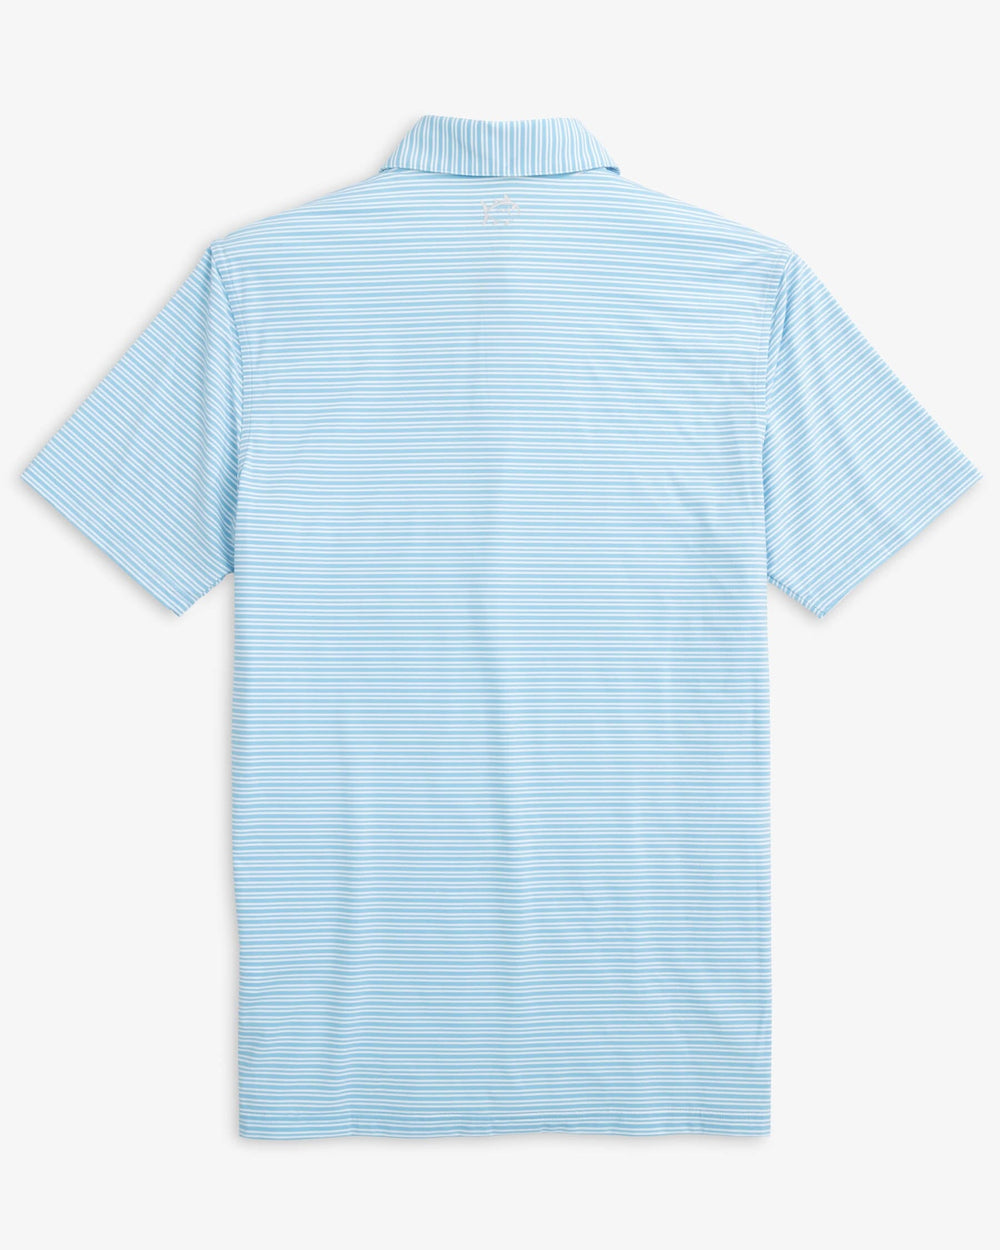 The back view of the Southern Tide brrr-eeze Millwood Stripe Performance Polo Shirt by Southern Tide - Rain Water